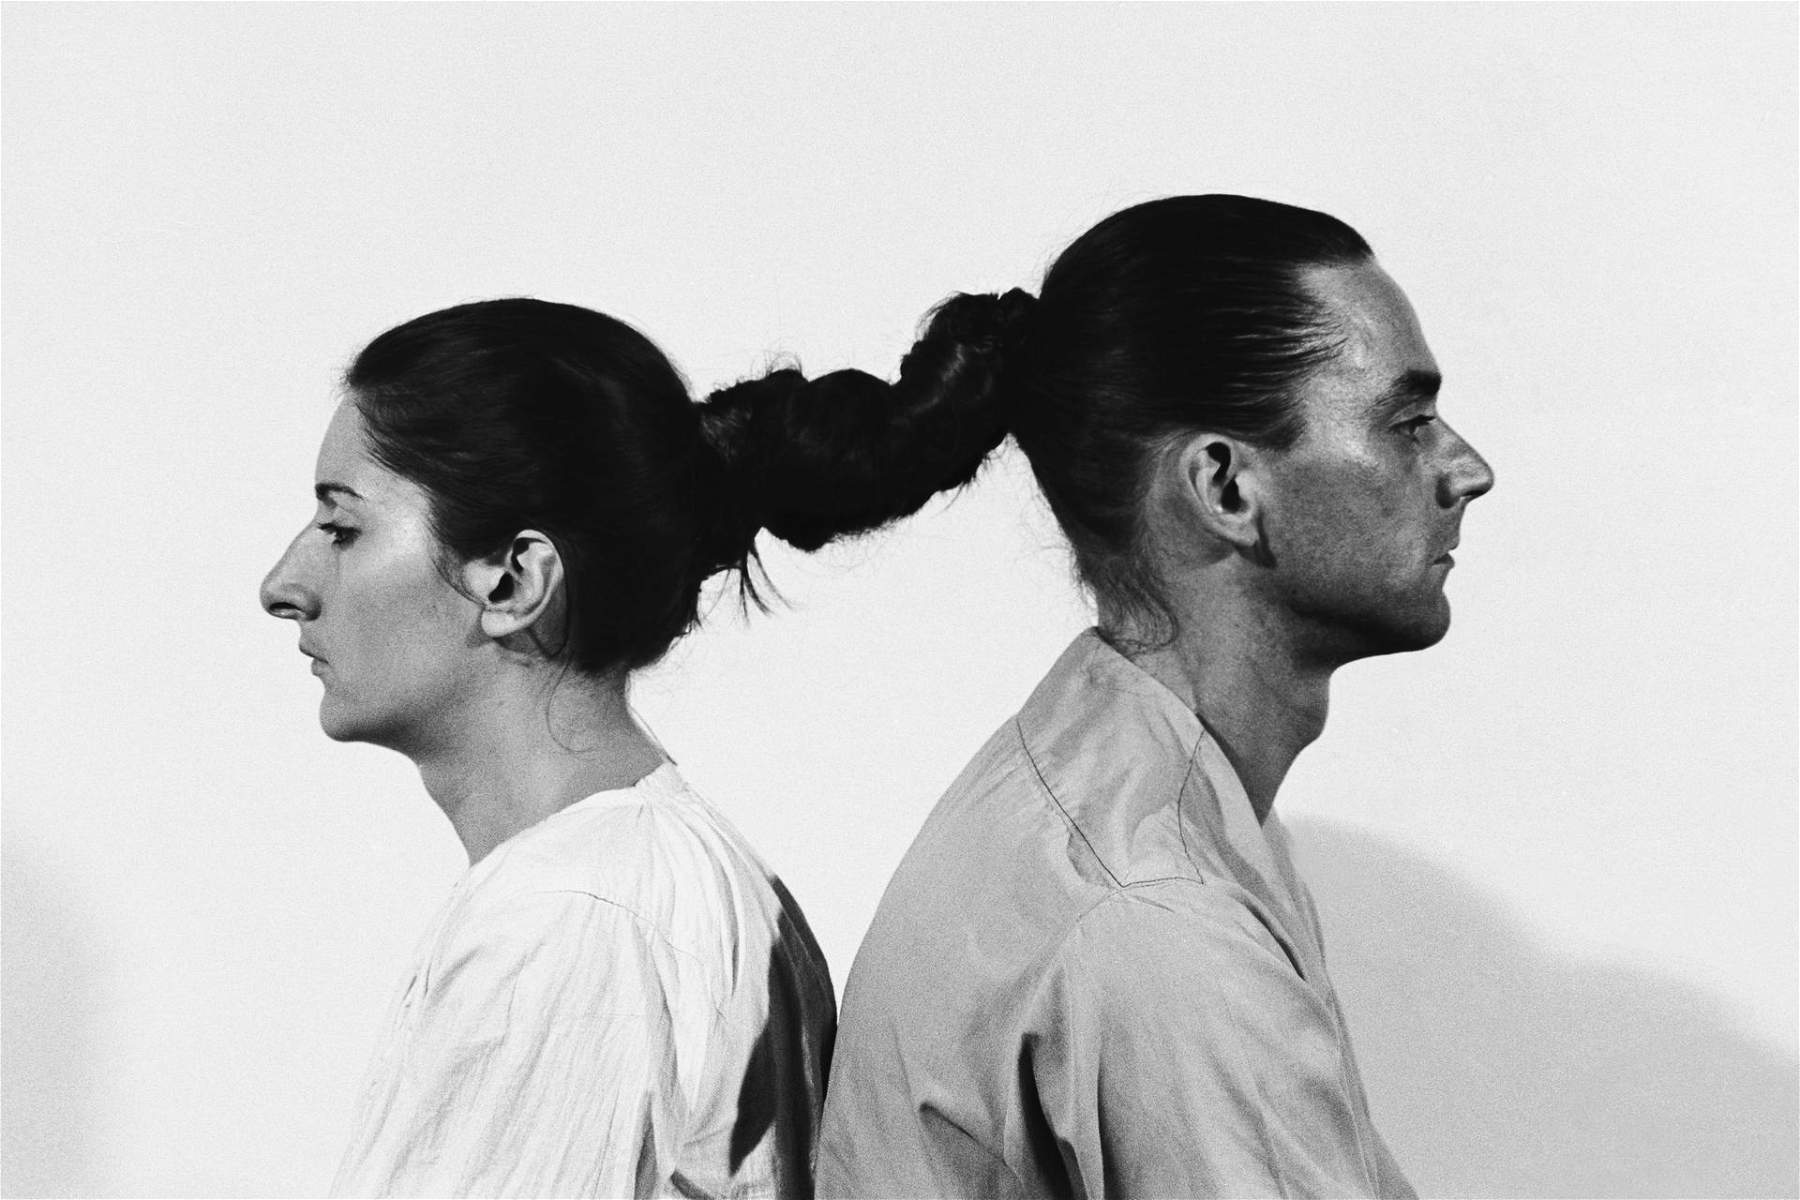 From Marina AbramoviÄ‡ to Francis AlÃ¿s, an exhibition in Merano on the theme of community